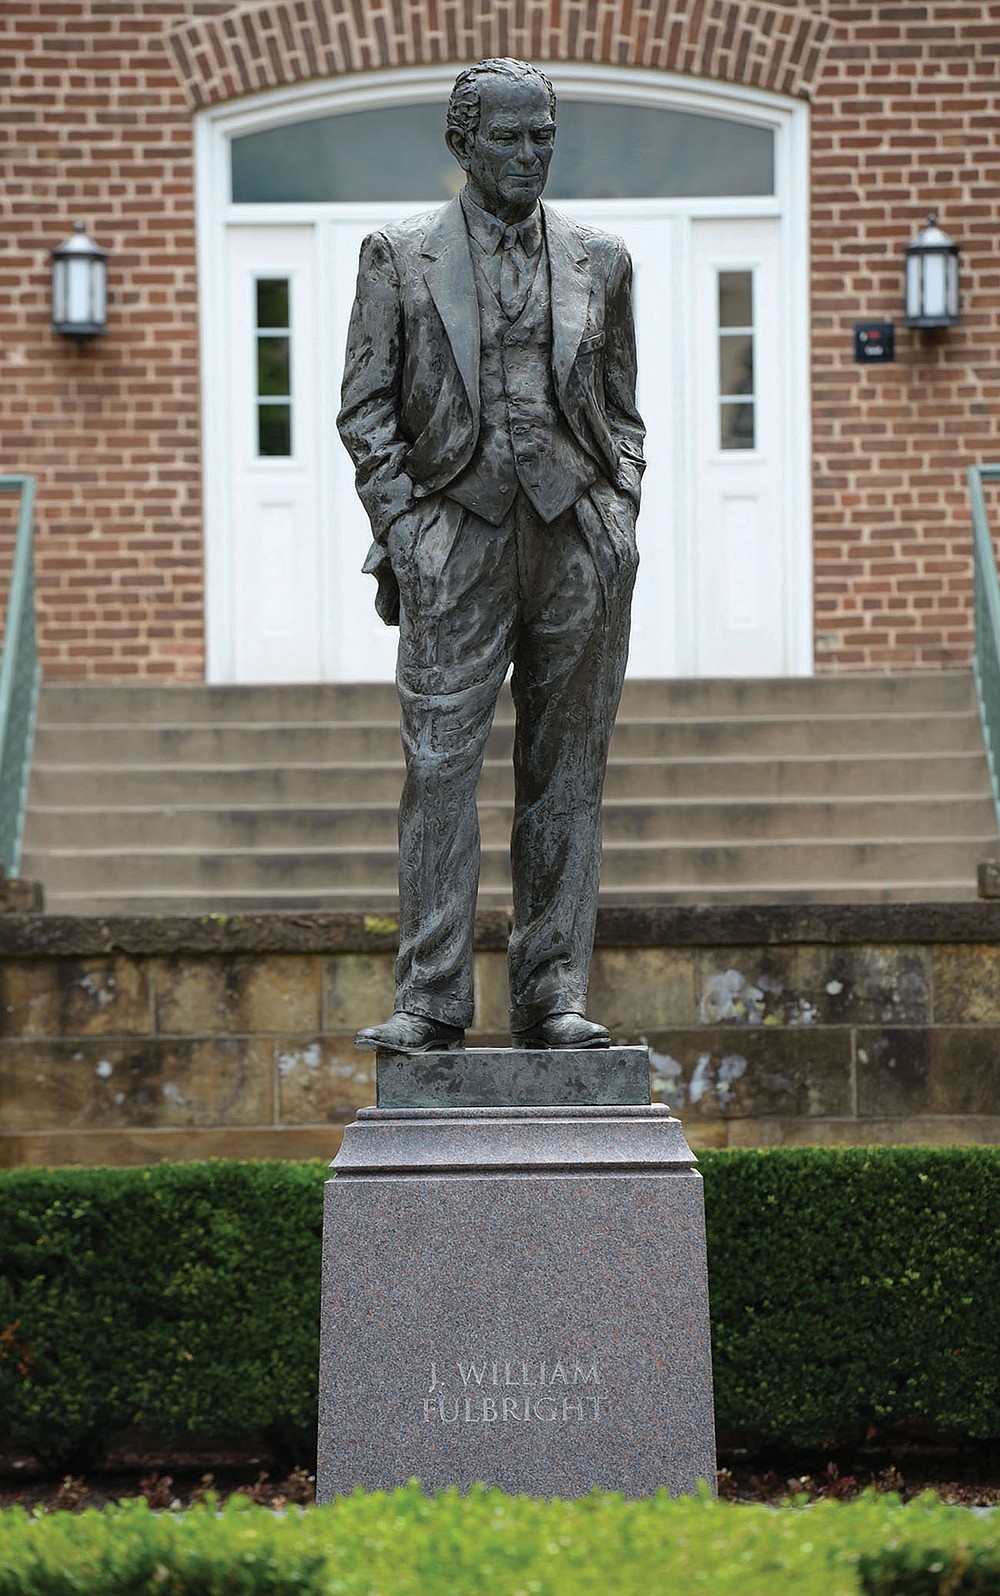 The future of a statue of J. William Fulbright, which stands near the west entrance of Old Main on the University of Arkansas campus in Fayetteville, is being debated because of the former university president and U.S. senator’s opposition to civil rights.
(NWA Democrat-Gazette/Andy Shupe)